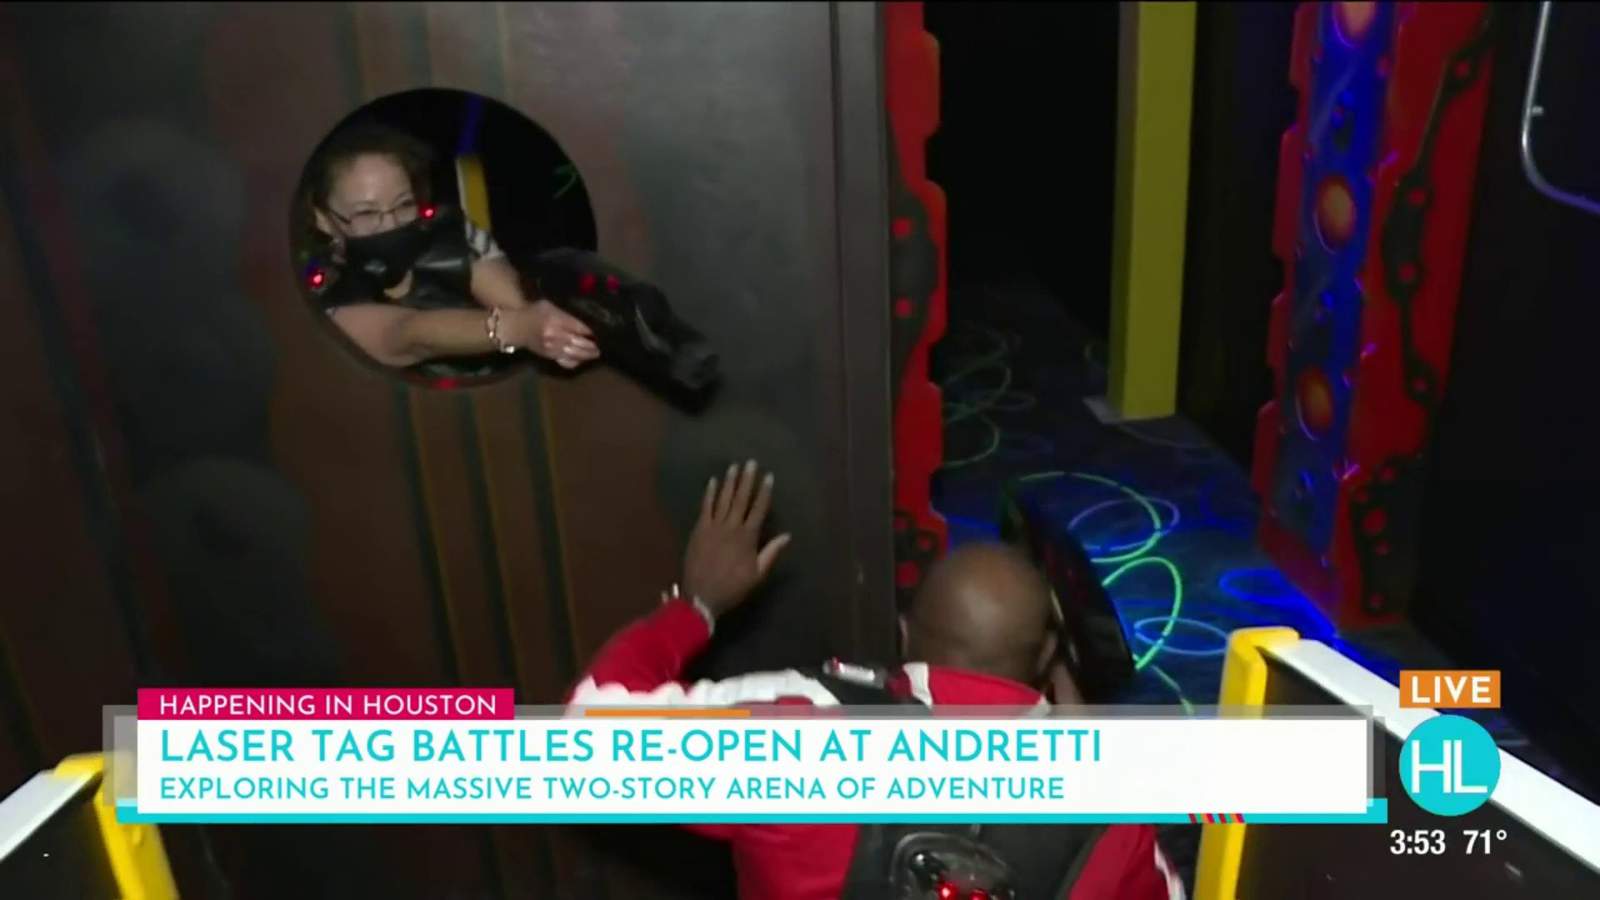 Let the battle begin with Andretti’s Laser Tag